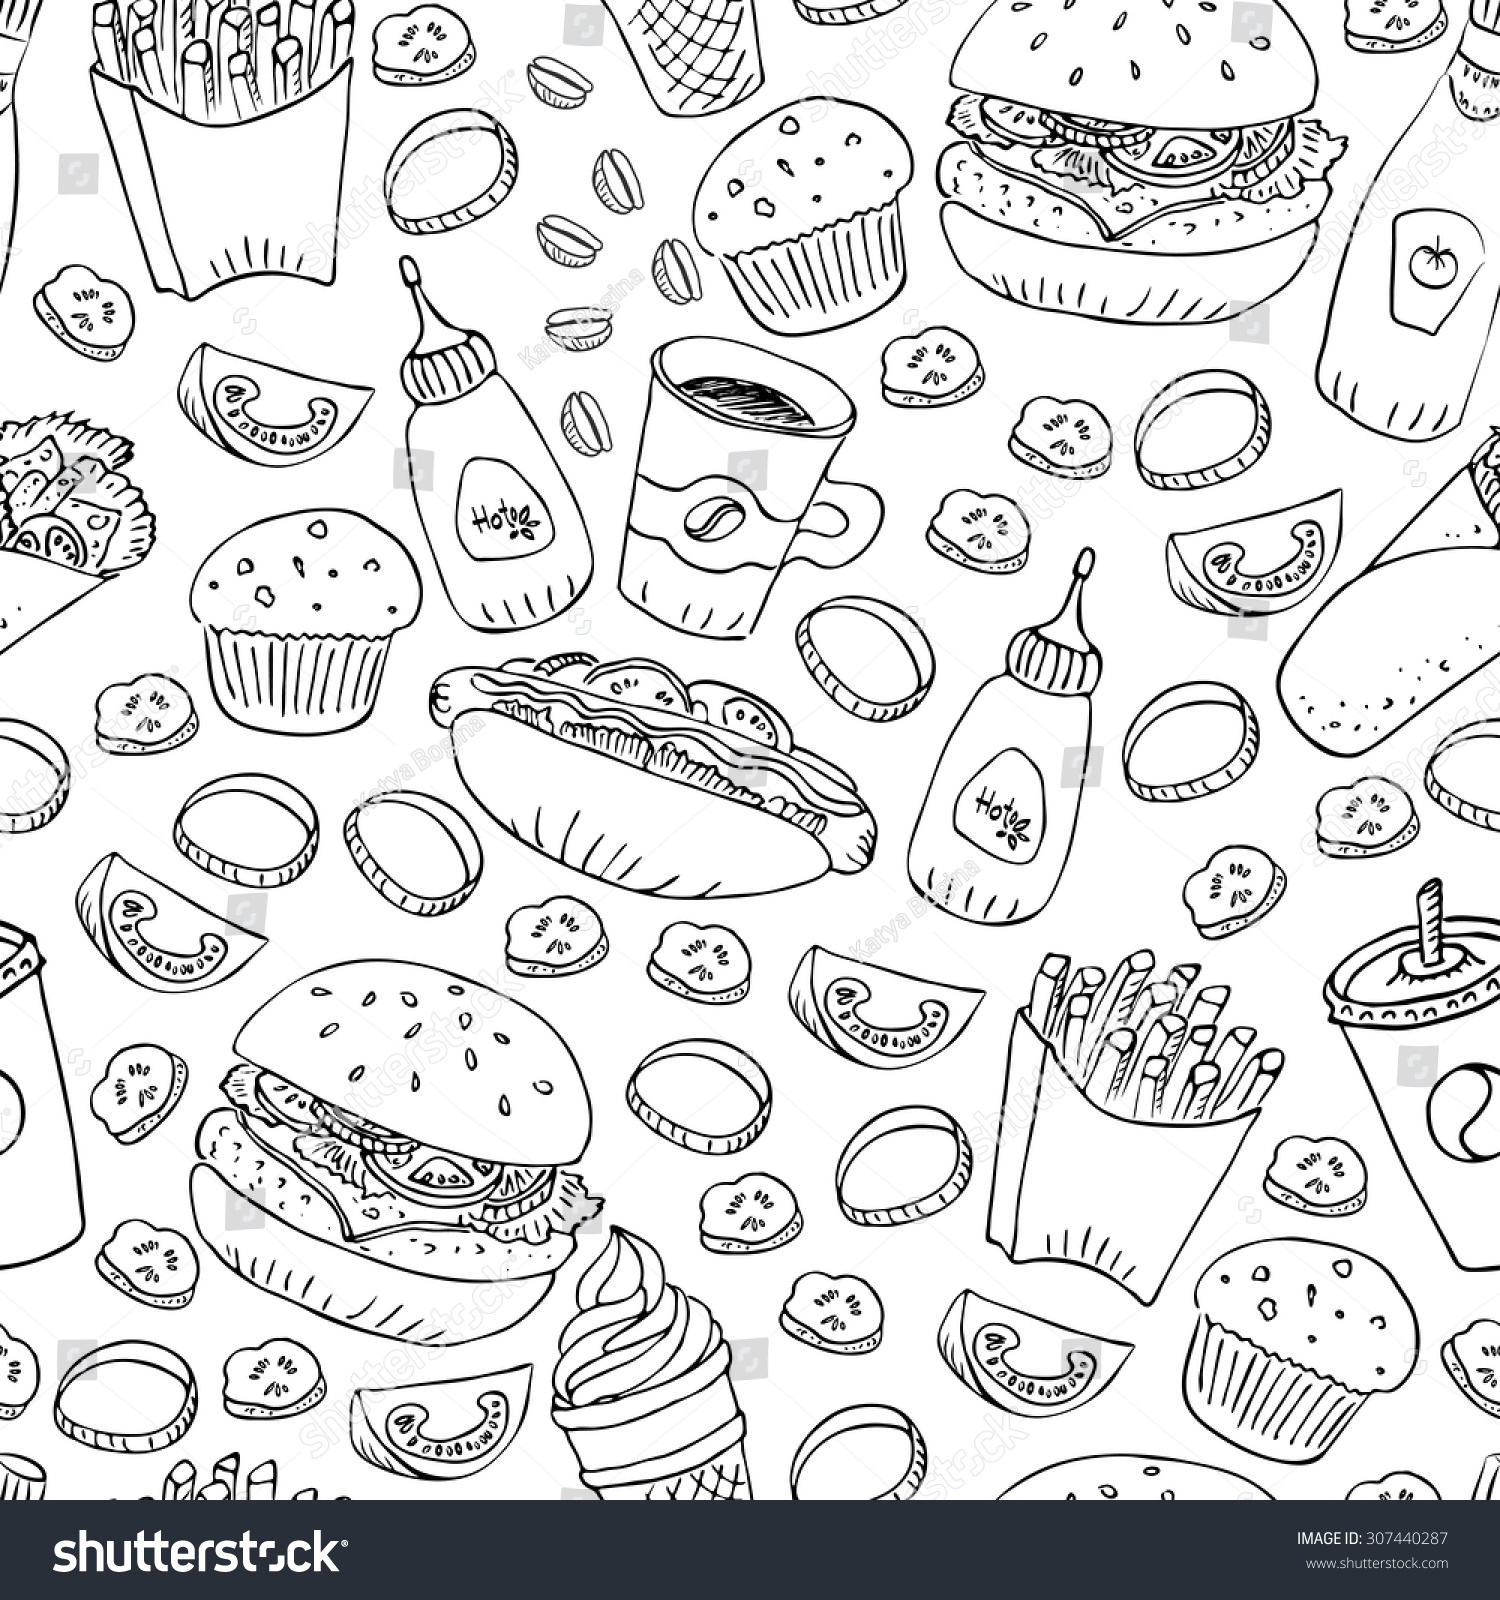 Hand Drawn Fast Food Doodle Seamless Stock Vector 